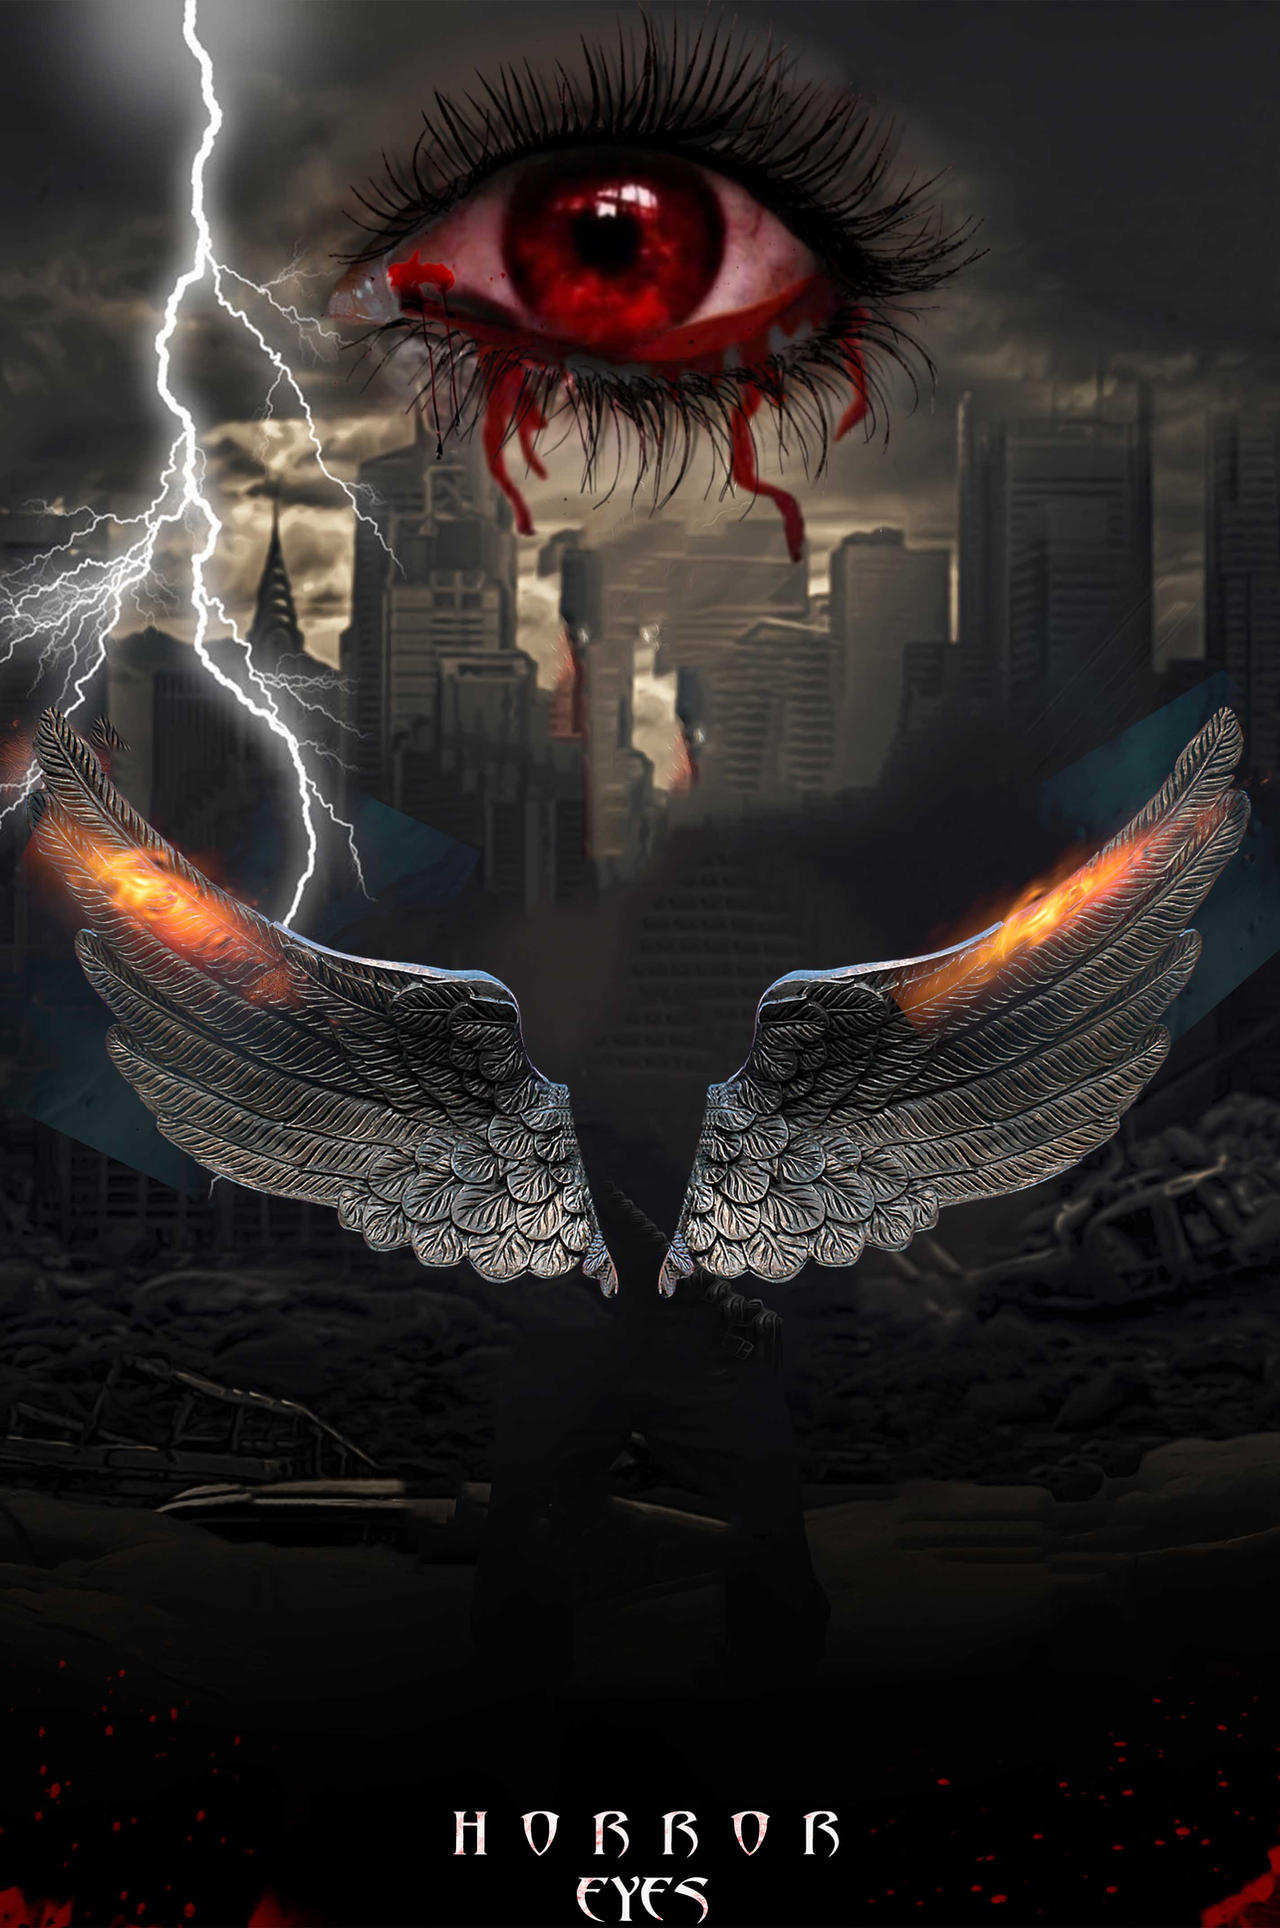 Wings Poster CB Editing Background Full HD Downloa by mypngimg on DeviantArt